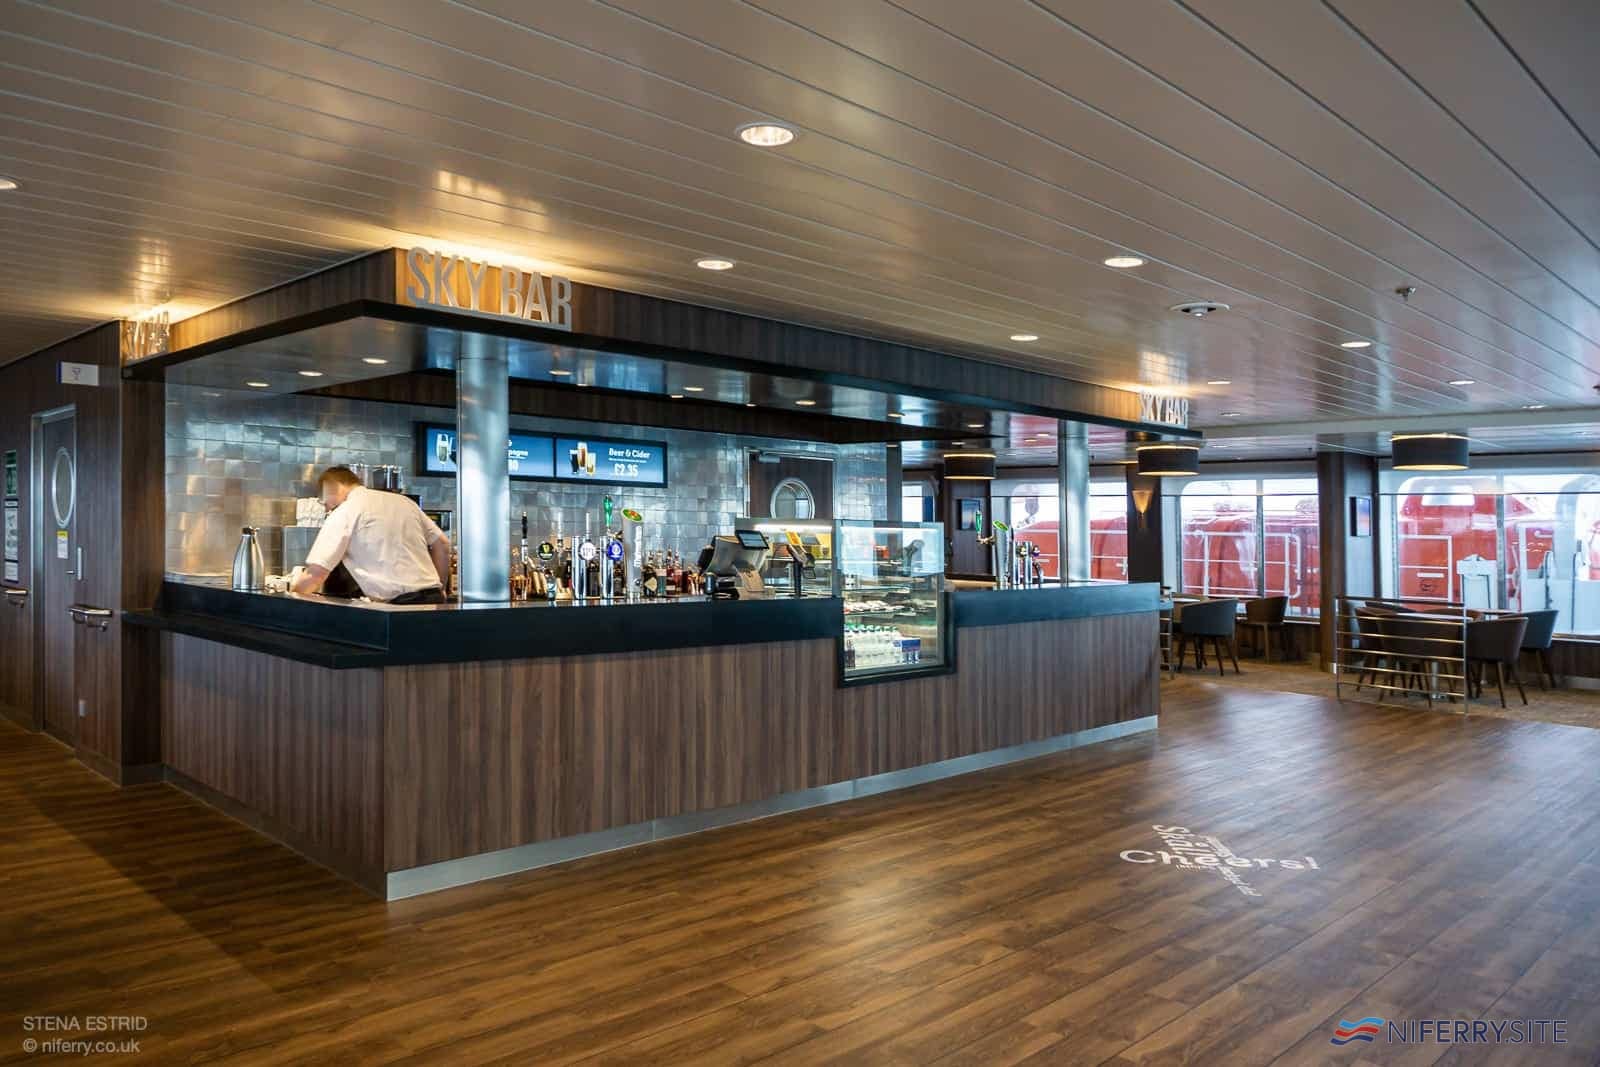 The Sky Bar counter, Deck 8, midships. © NIferry.co.uk.